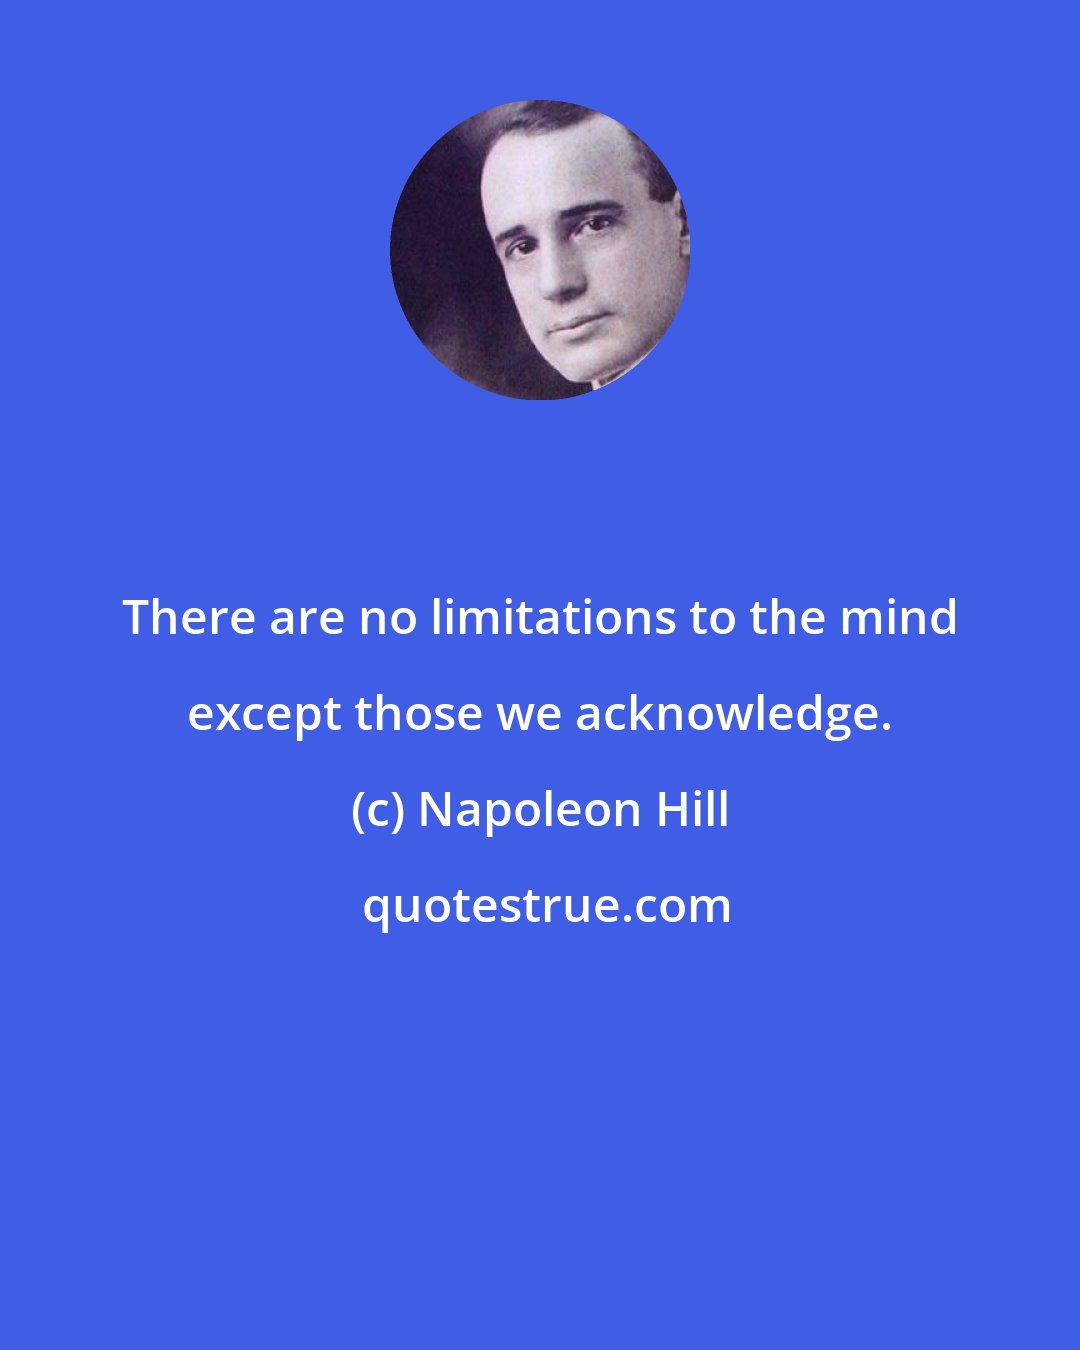 Napoleon Hill: There are no limitations to the mind except those we acknowledge.